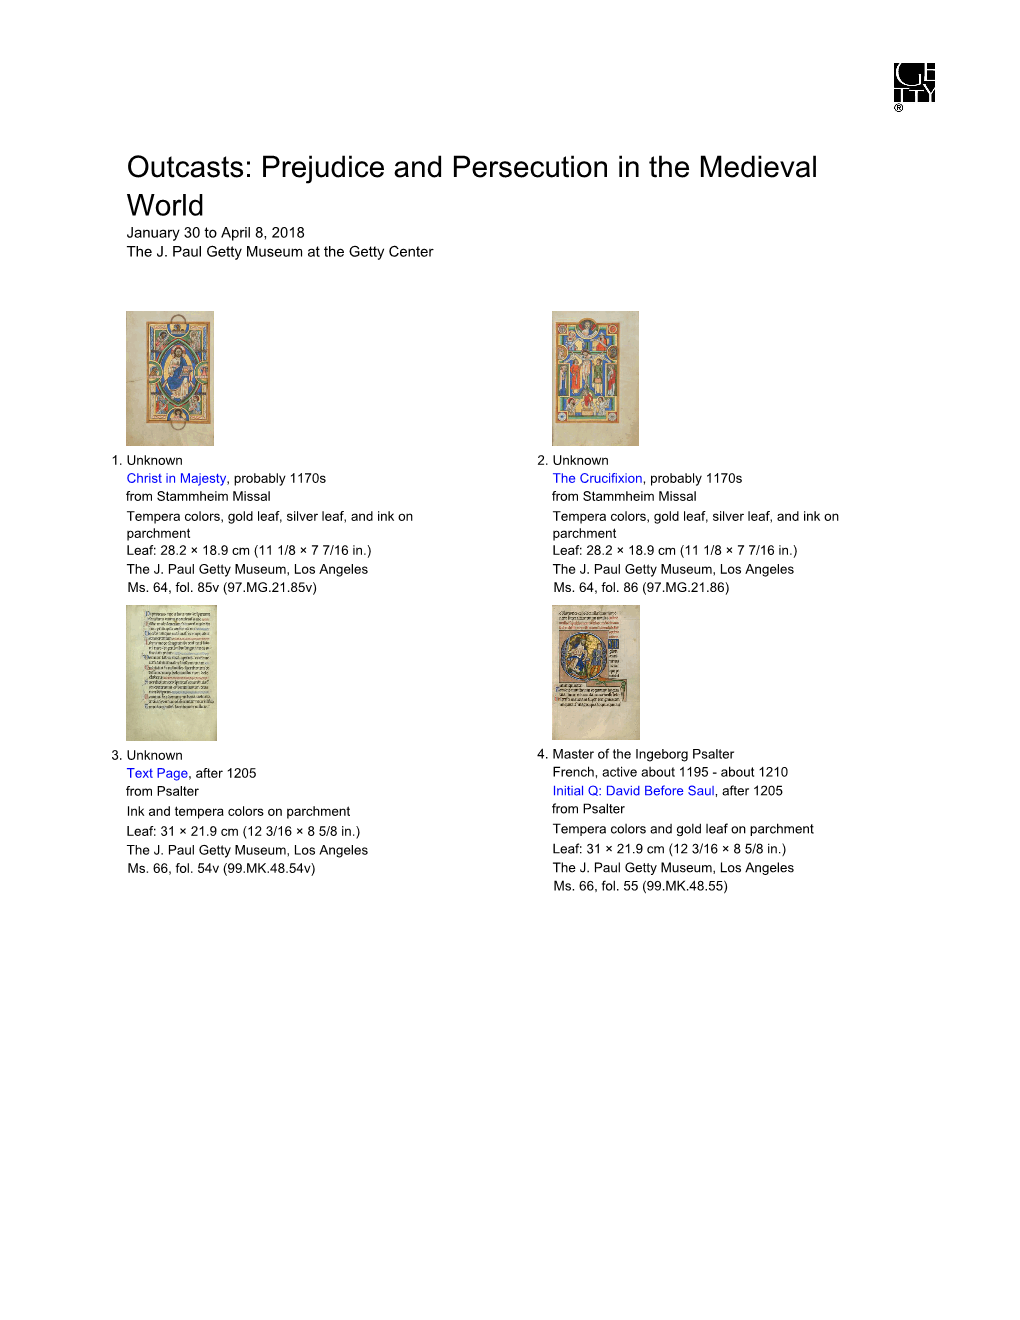 Outcasts: Prejudice and Persecution in the Medieval World January 30 to April 8, 2018 the J